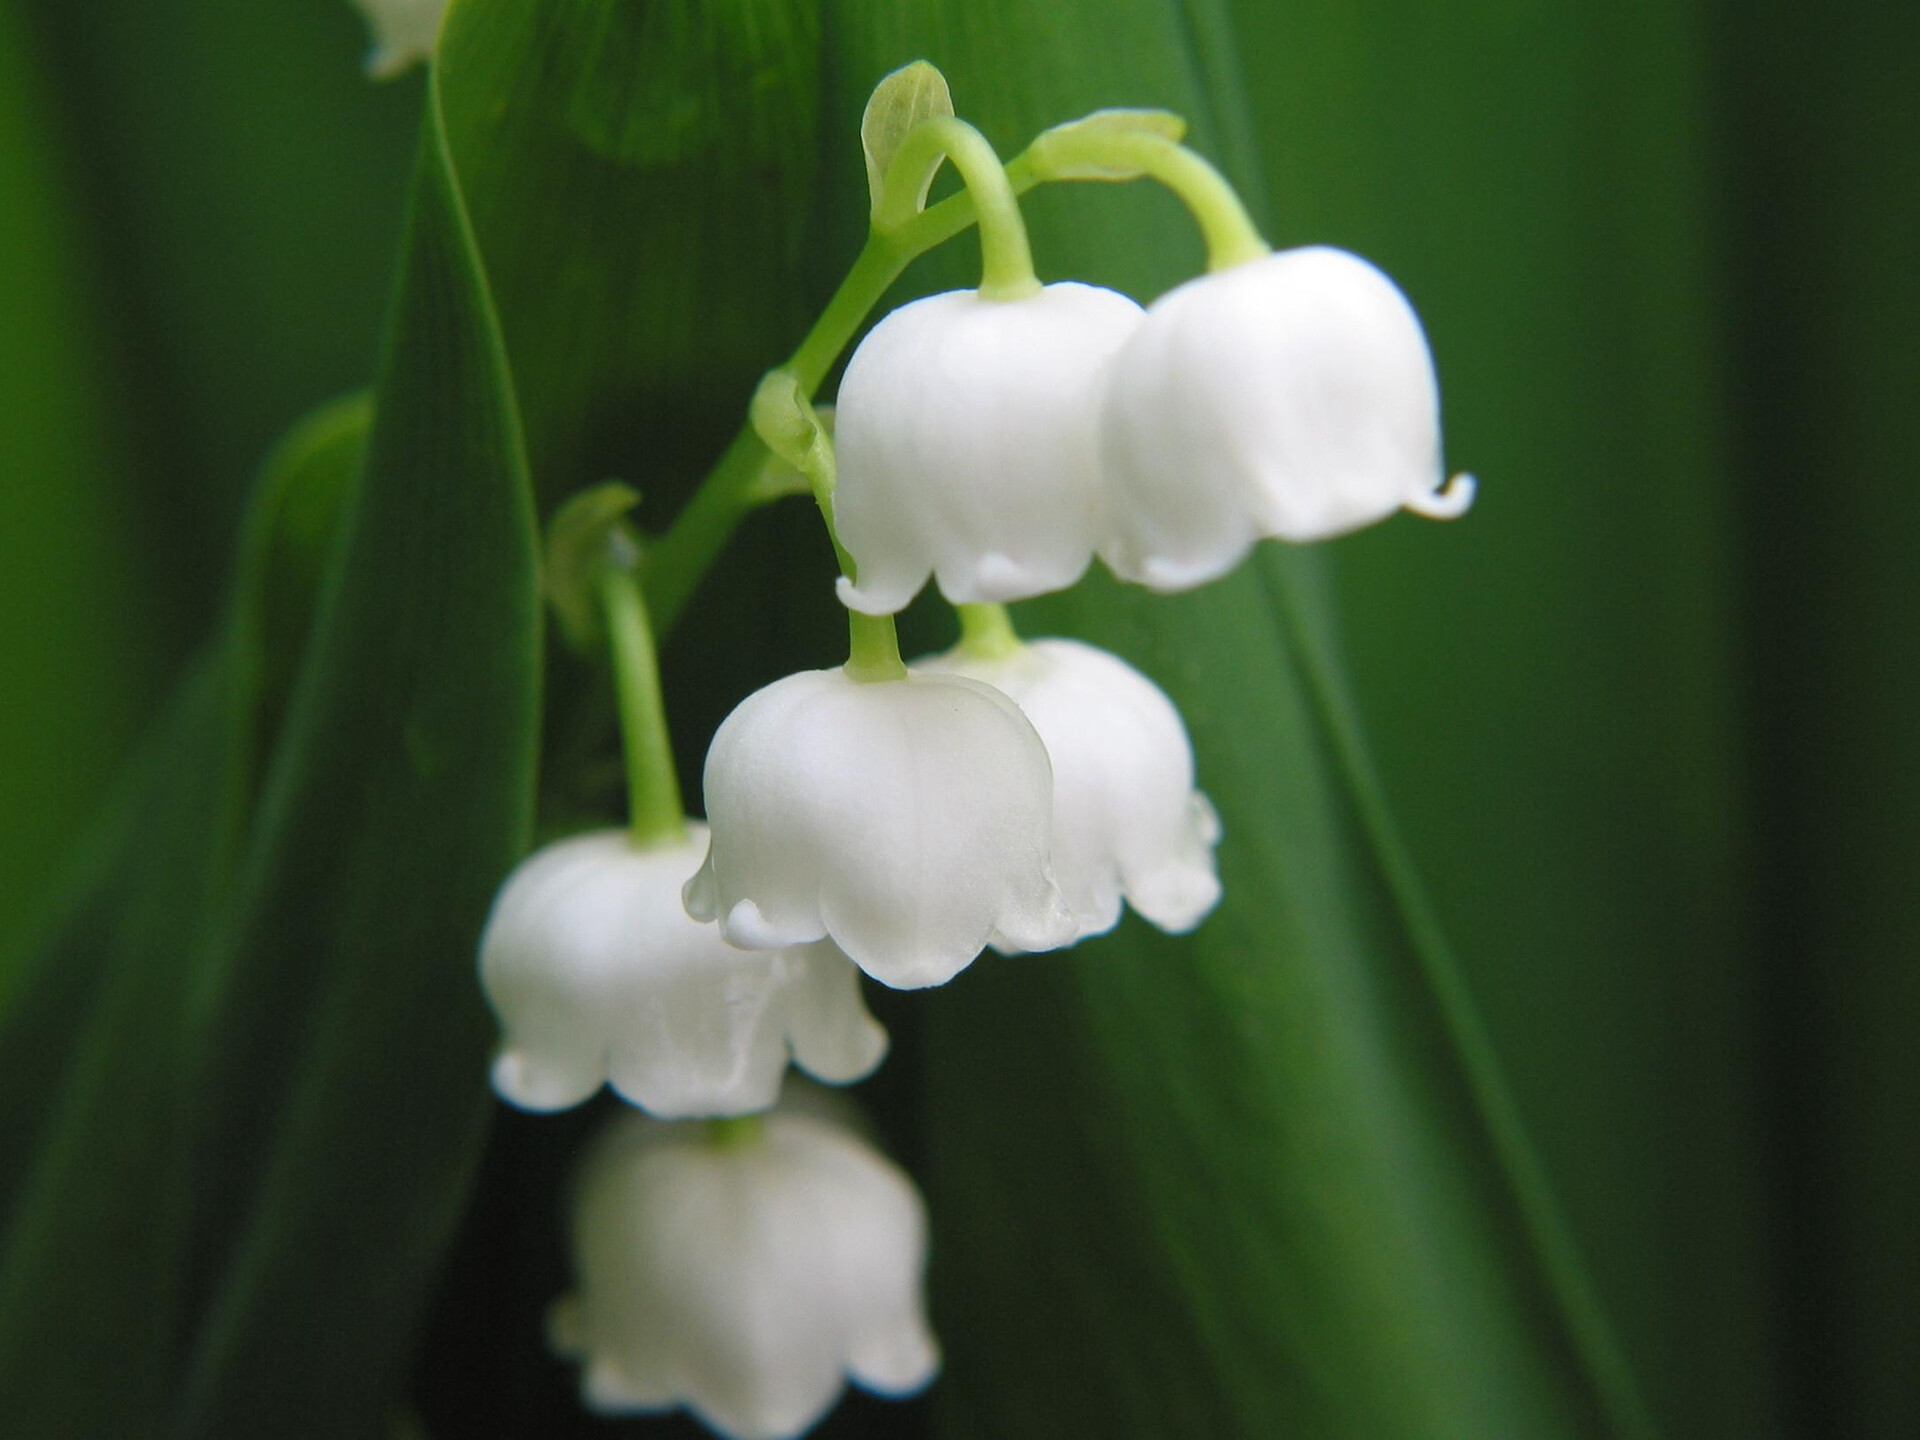 Lily of the Valley: This fast-growing perennial provides excellent ground cover in gardens and quickly spreads to form a fragrant carpet of white or pink nodding, bell-shaped flowers in spring. 1920x1440 HD Wallpaper.